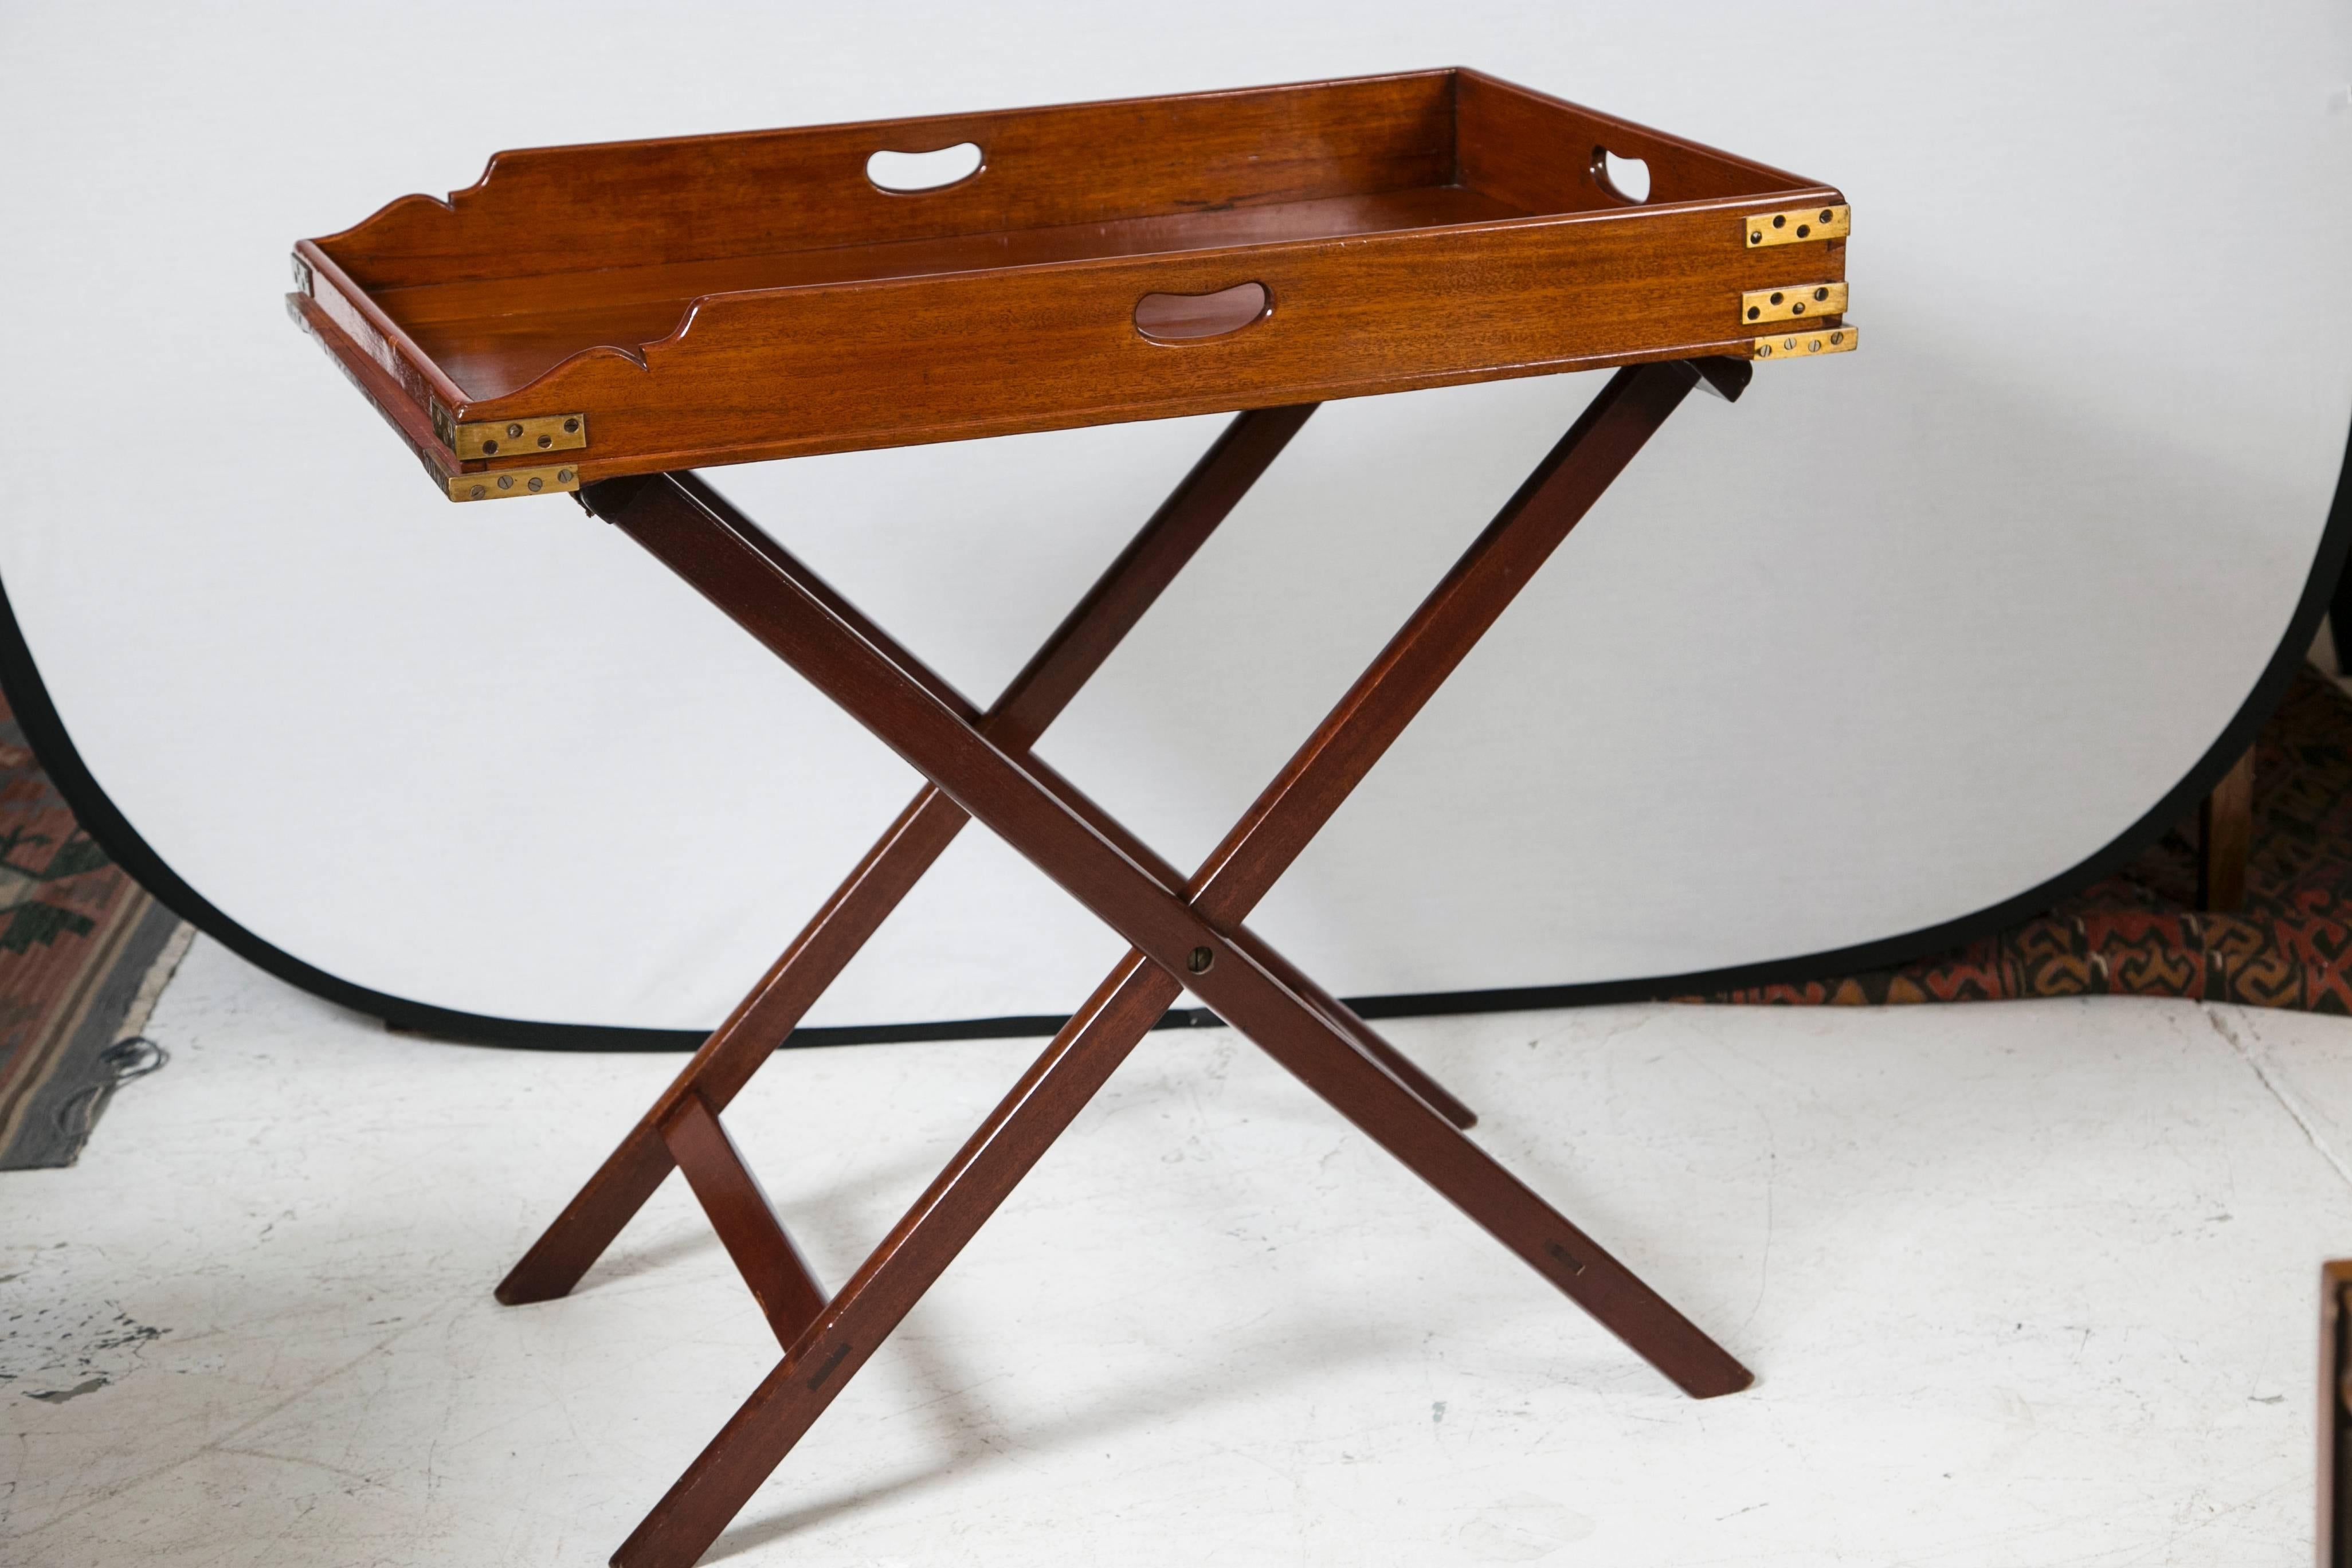 Antique Butler's tray table with handmade brass accents. The details have the beautiful softness of age. Made of mahogany with a brilliant range of color and grain. Original straps hand-hammered with handmade nails. A rare beauty!